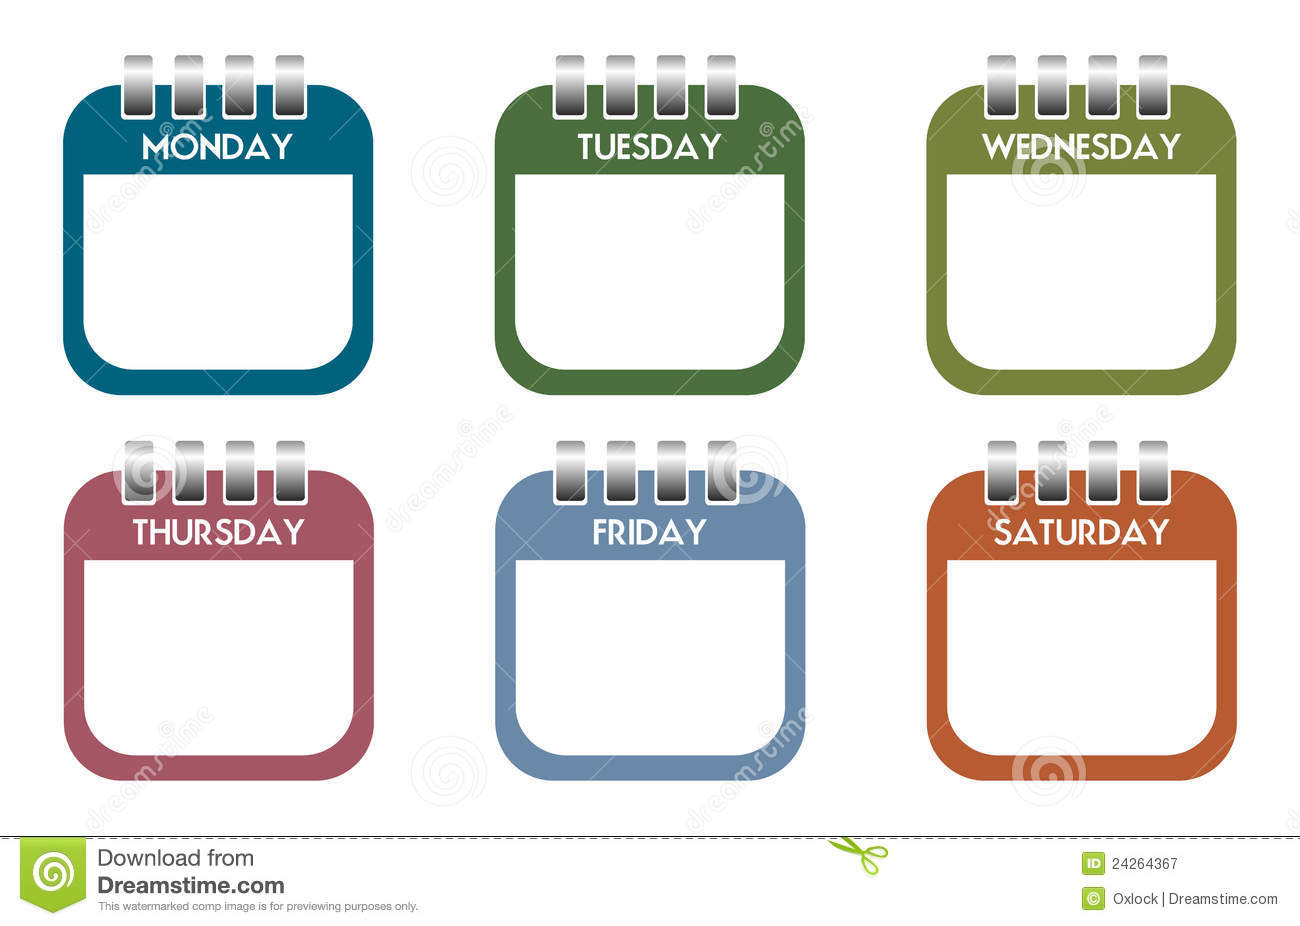 The best free Calendar clipart images. Download from 356.